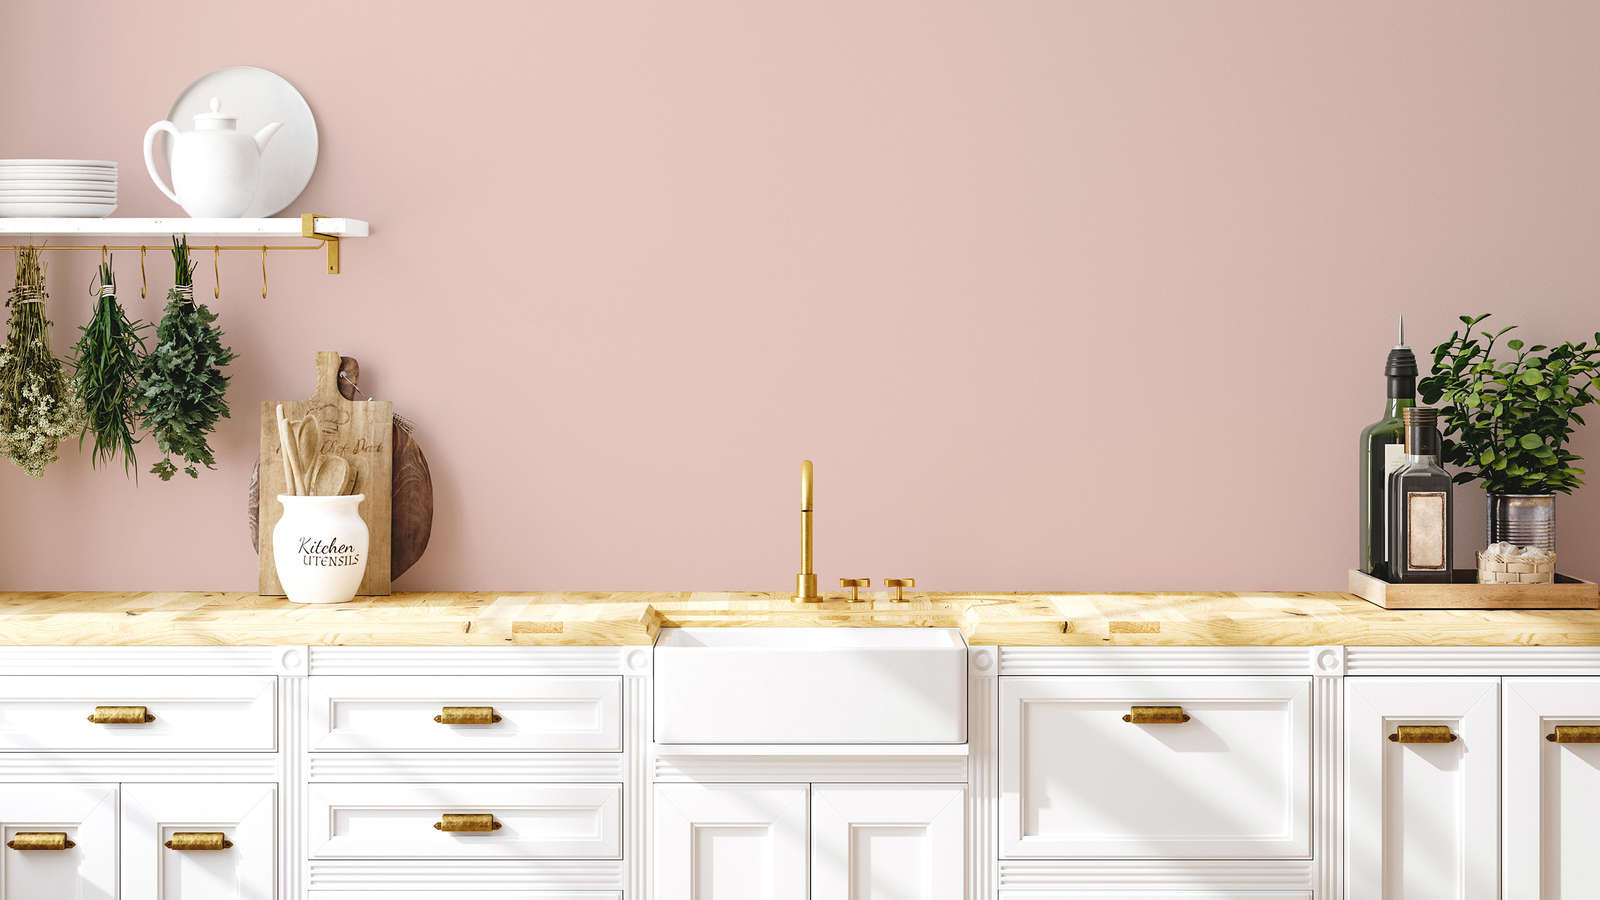             Premium Wall Paint Homely Old Pink »Luxury Lipstick« NW1001 – 2.5 litre
        